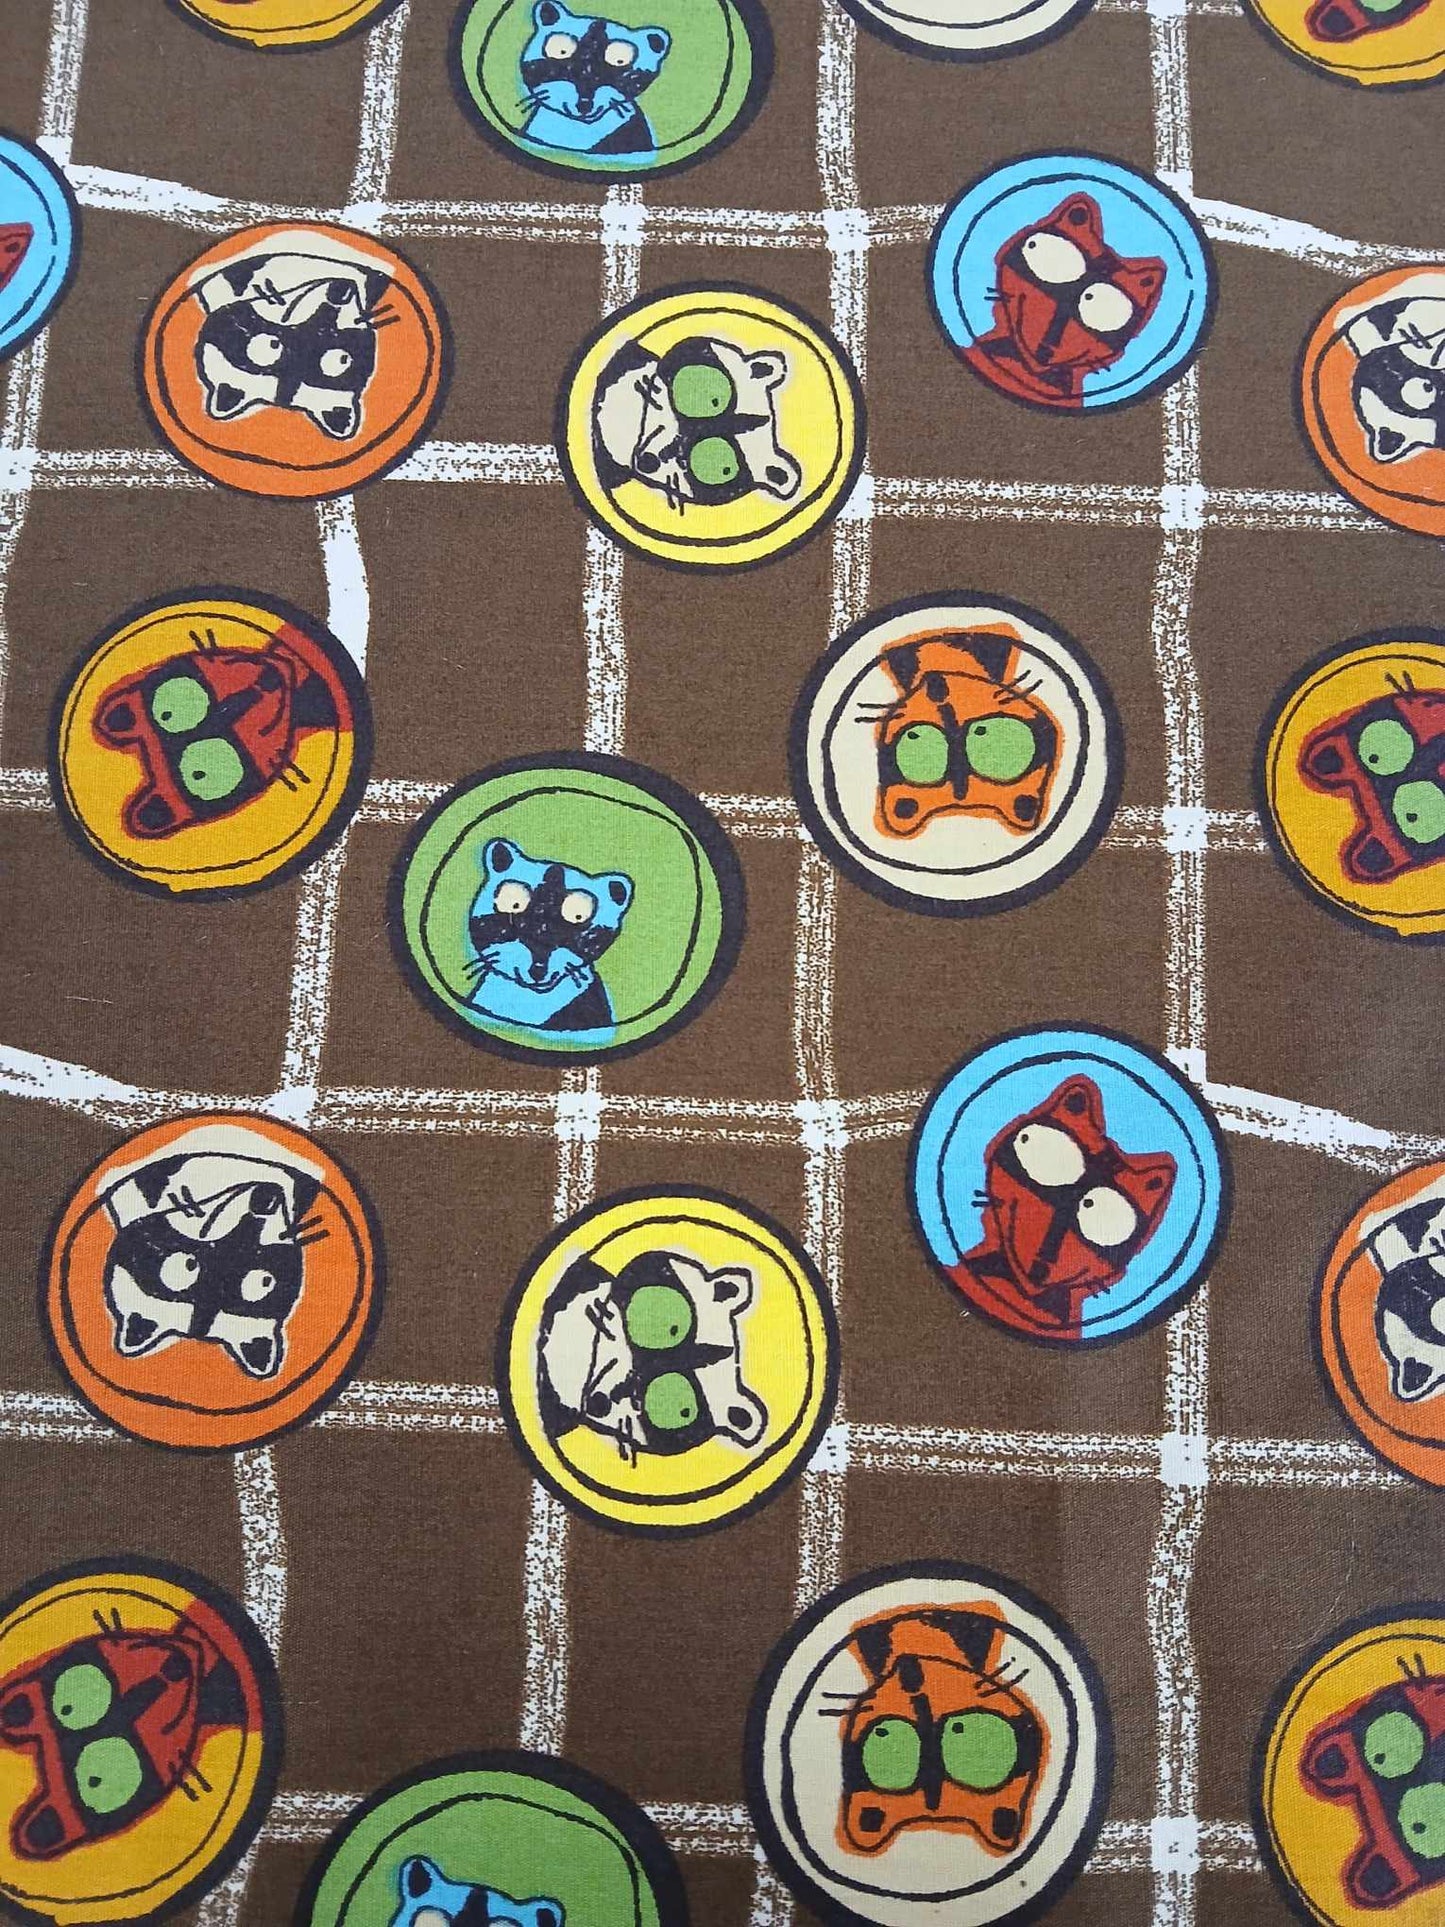 100% Cotton - Raccoons - Brown/Cream/Blue/Green/Orange - 56" Wide - Sold By the Metre